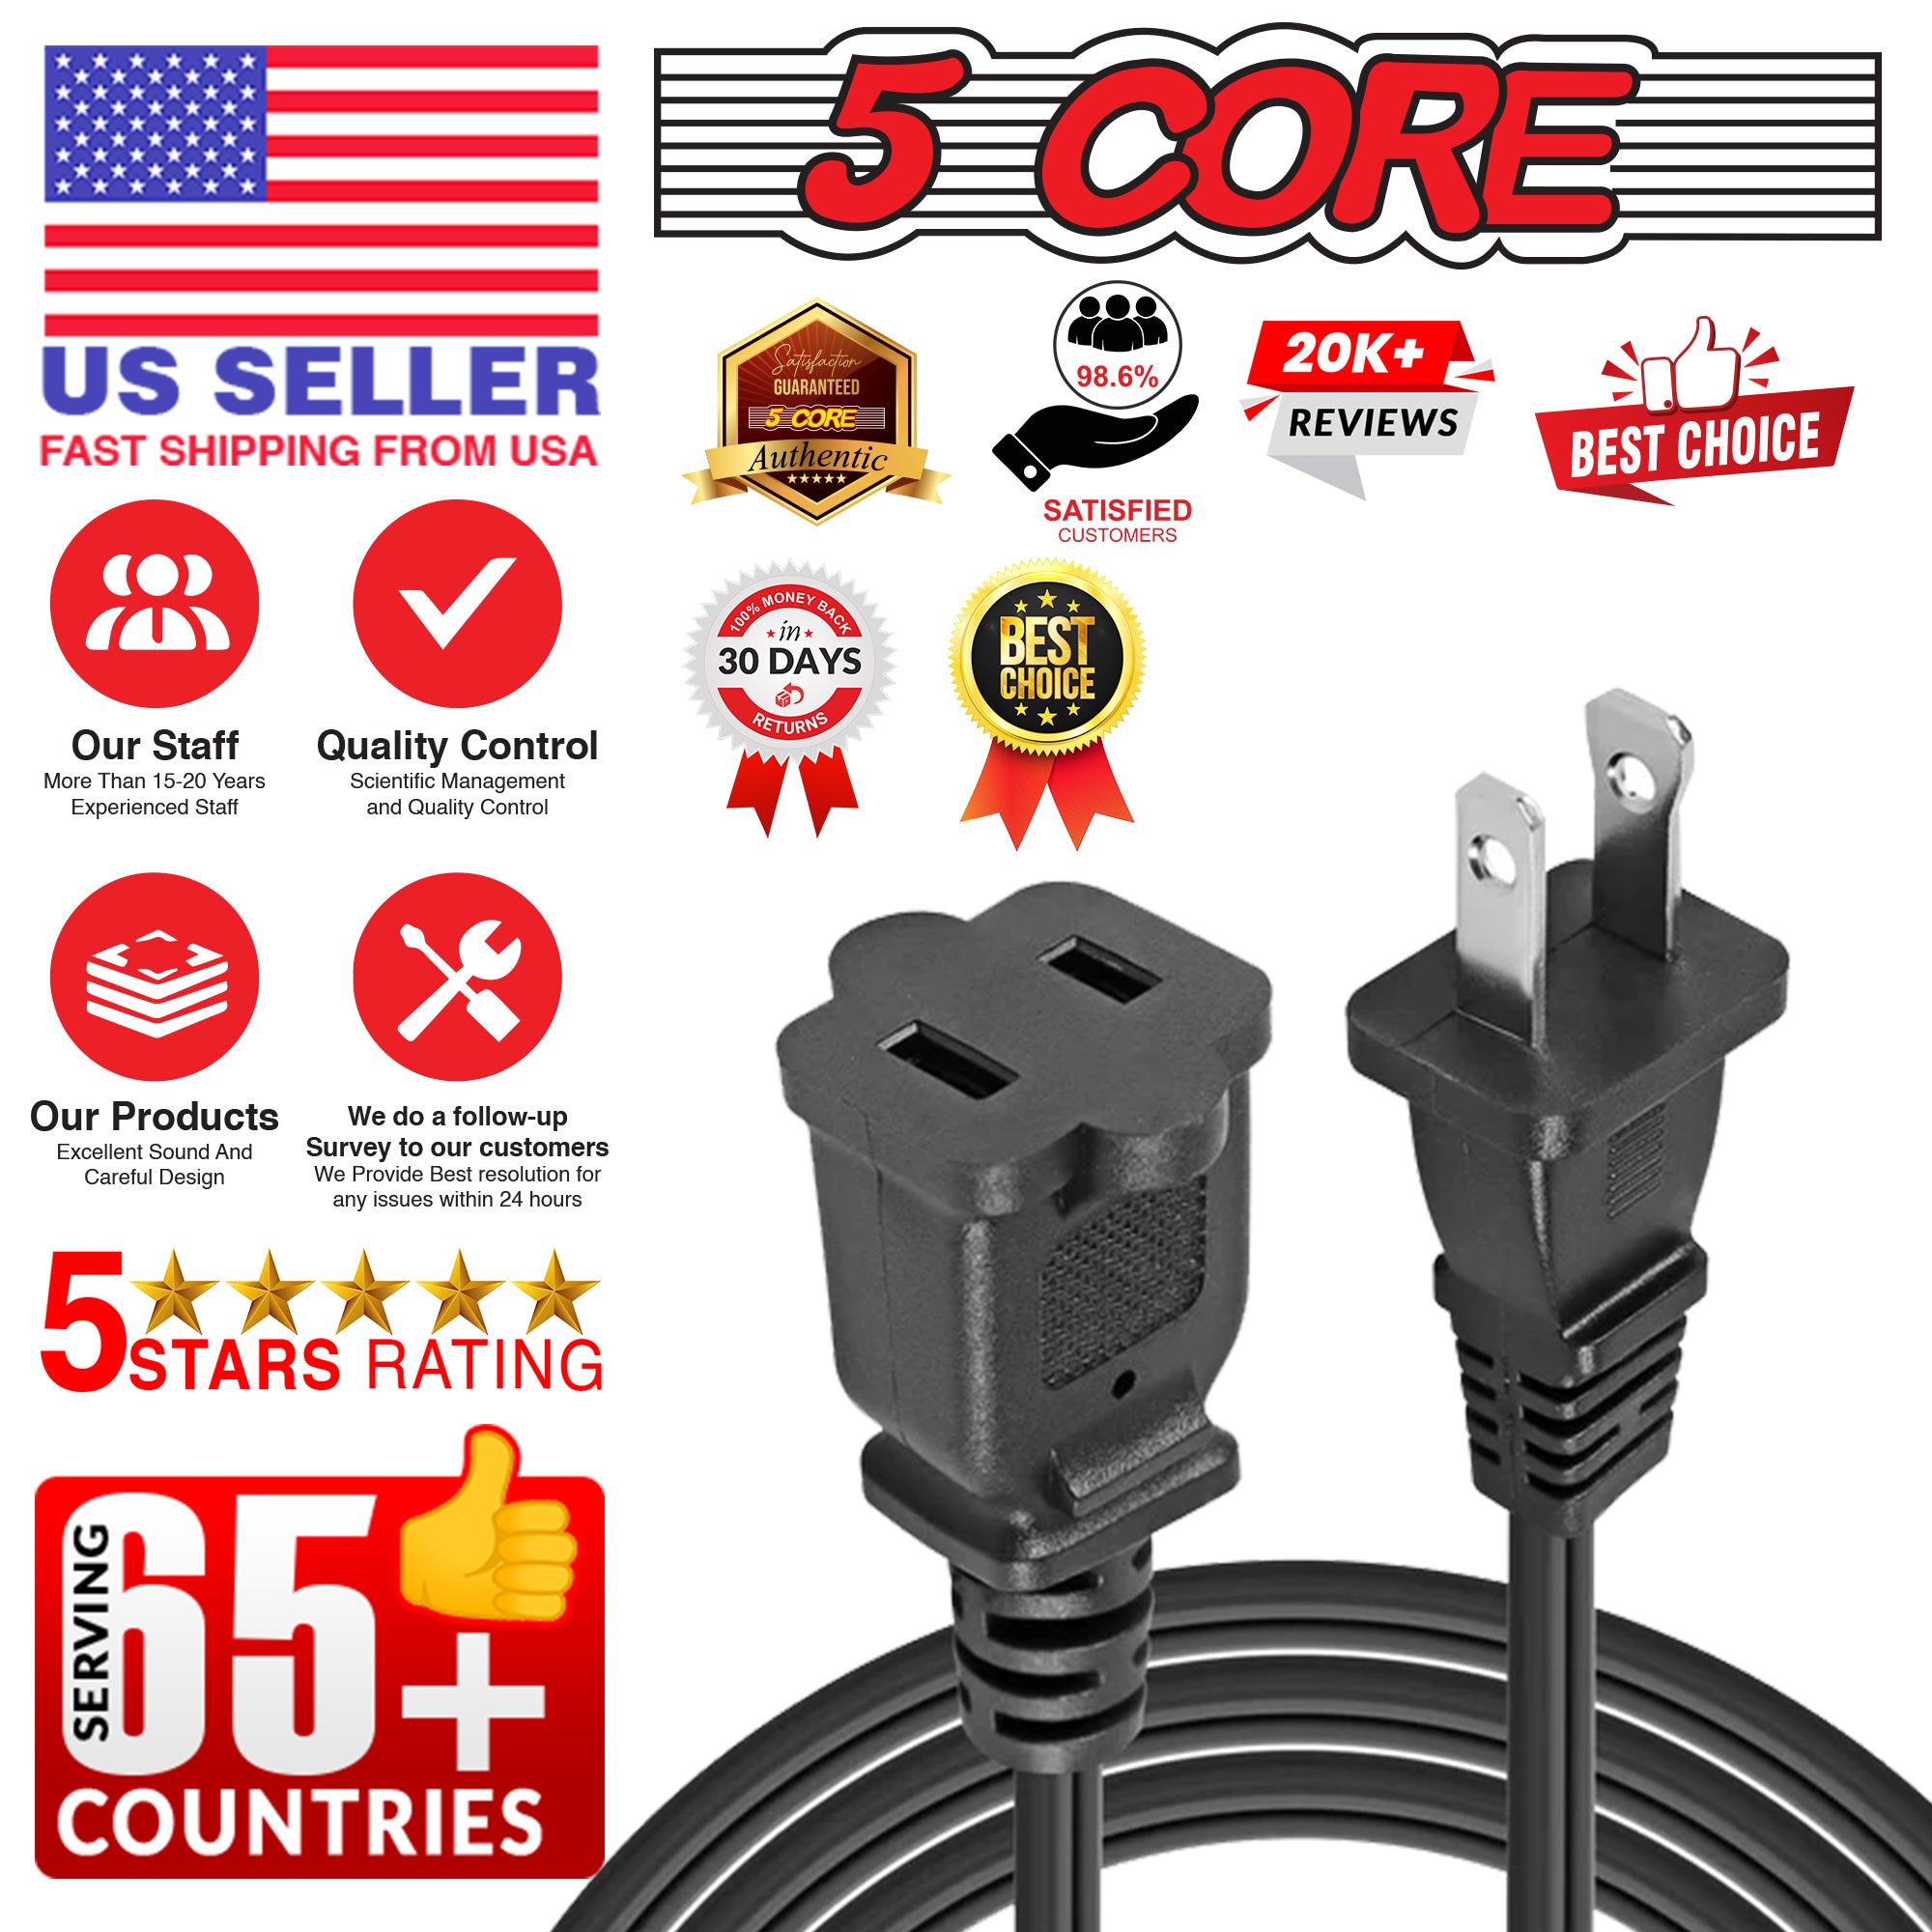 5 Core AC Power Cord 15 Ft • US Polarized Male to Female 2 Prong Extension Adapter 16AWG/2C 125V 13A